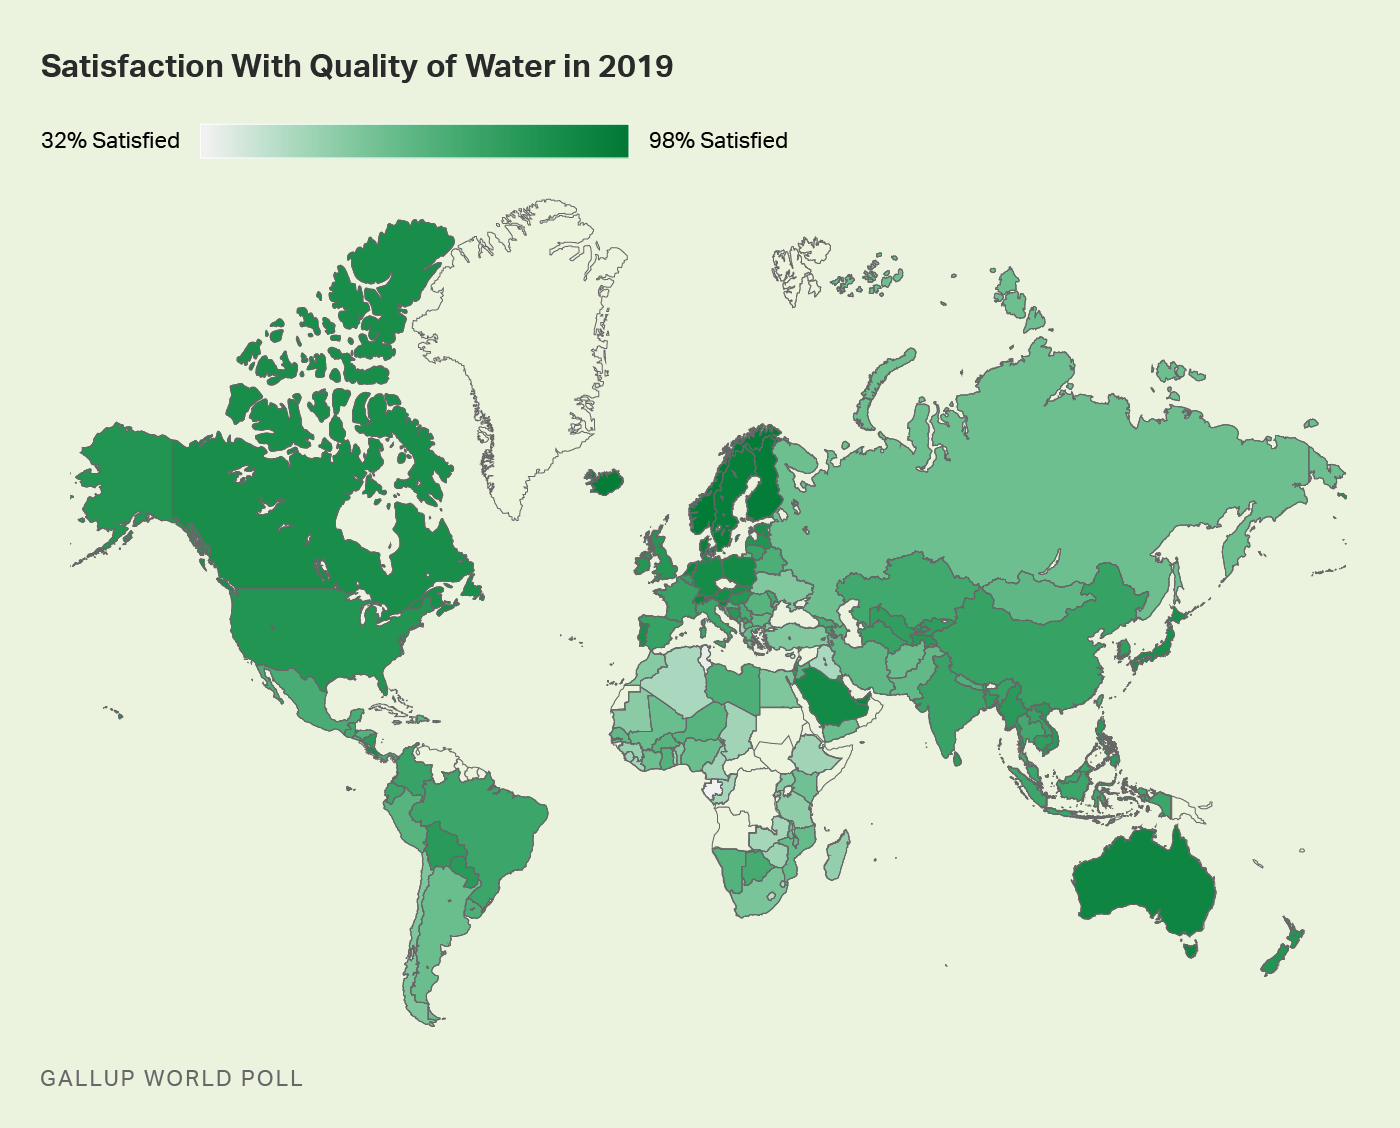 Worldwide satisfaction with water quality.